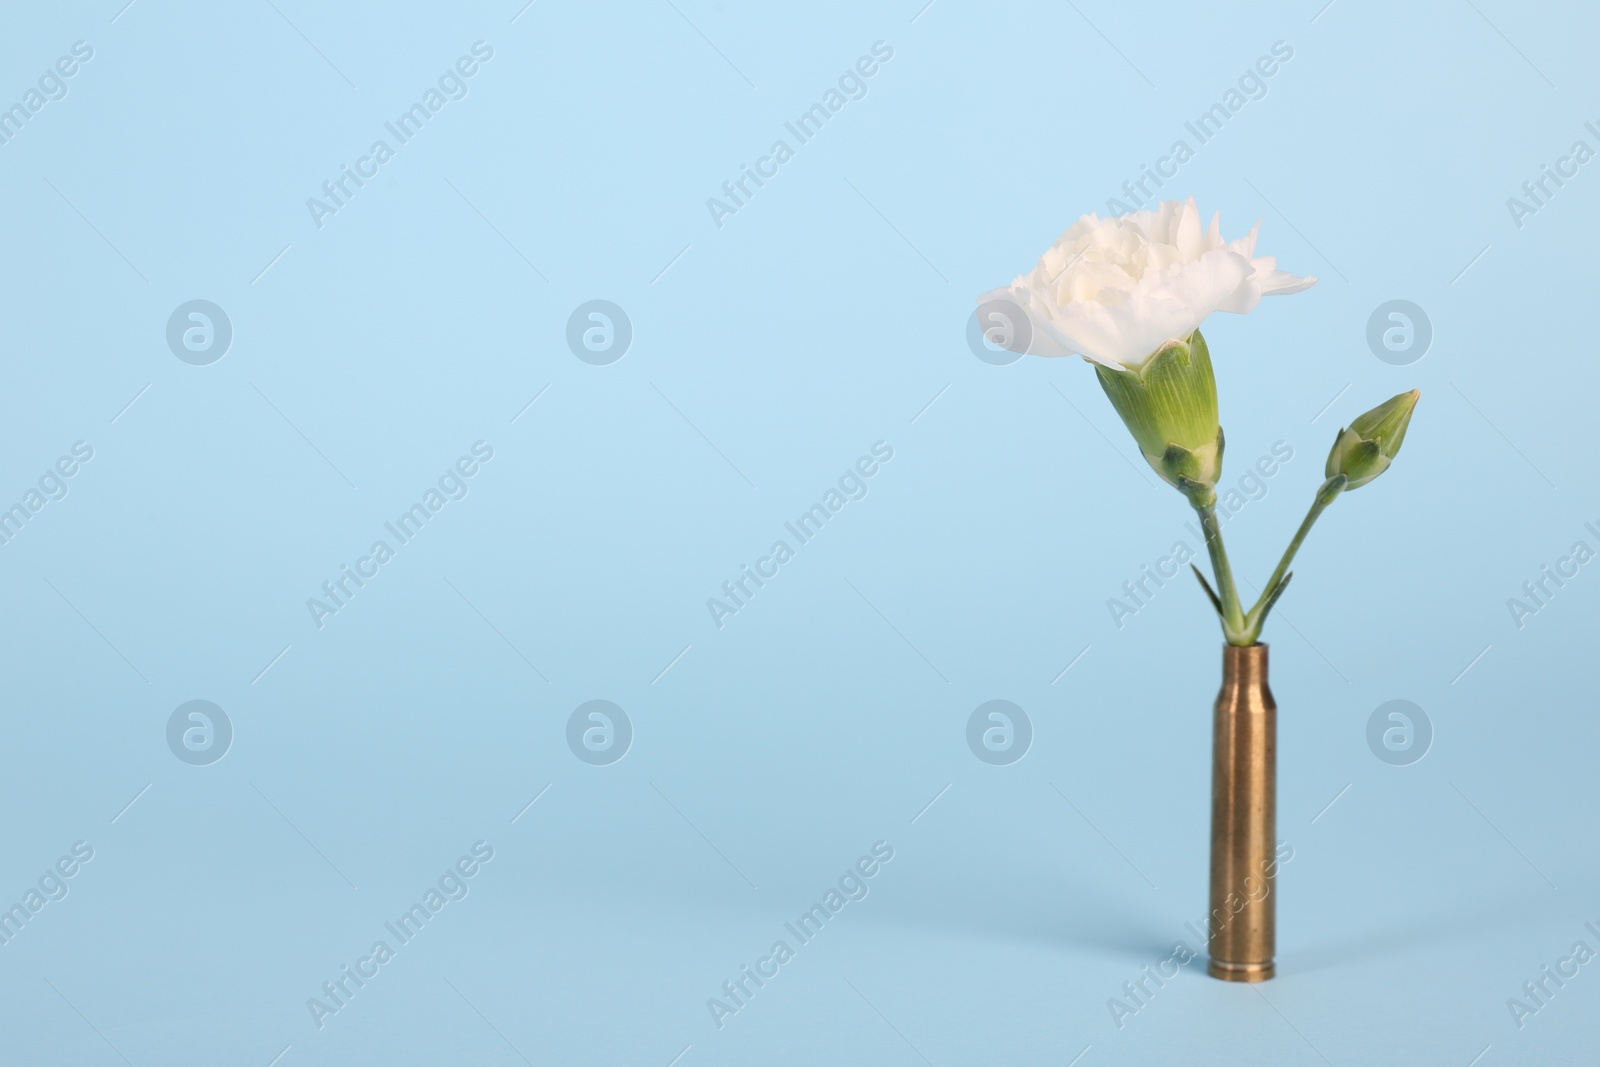 Photo of Bullet cartridge case and beautiful carnation flower on light blue background, space for text